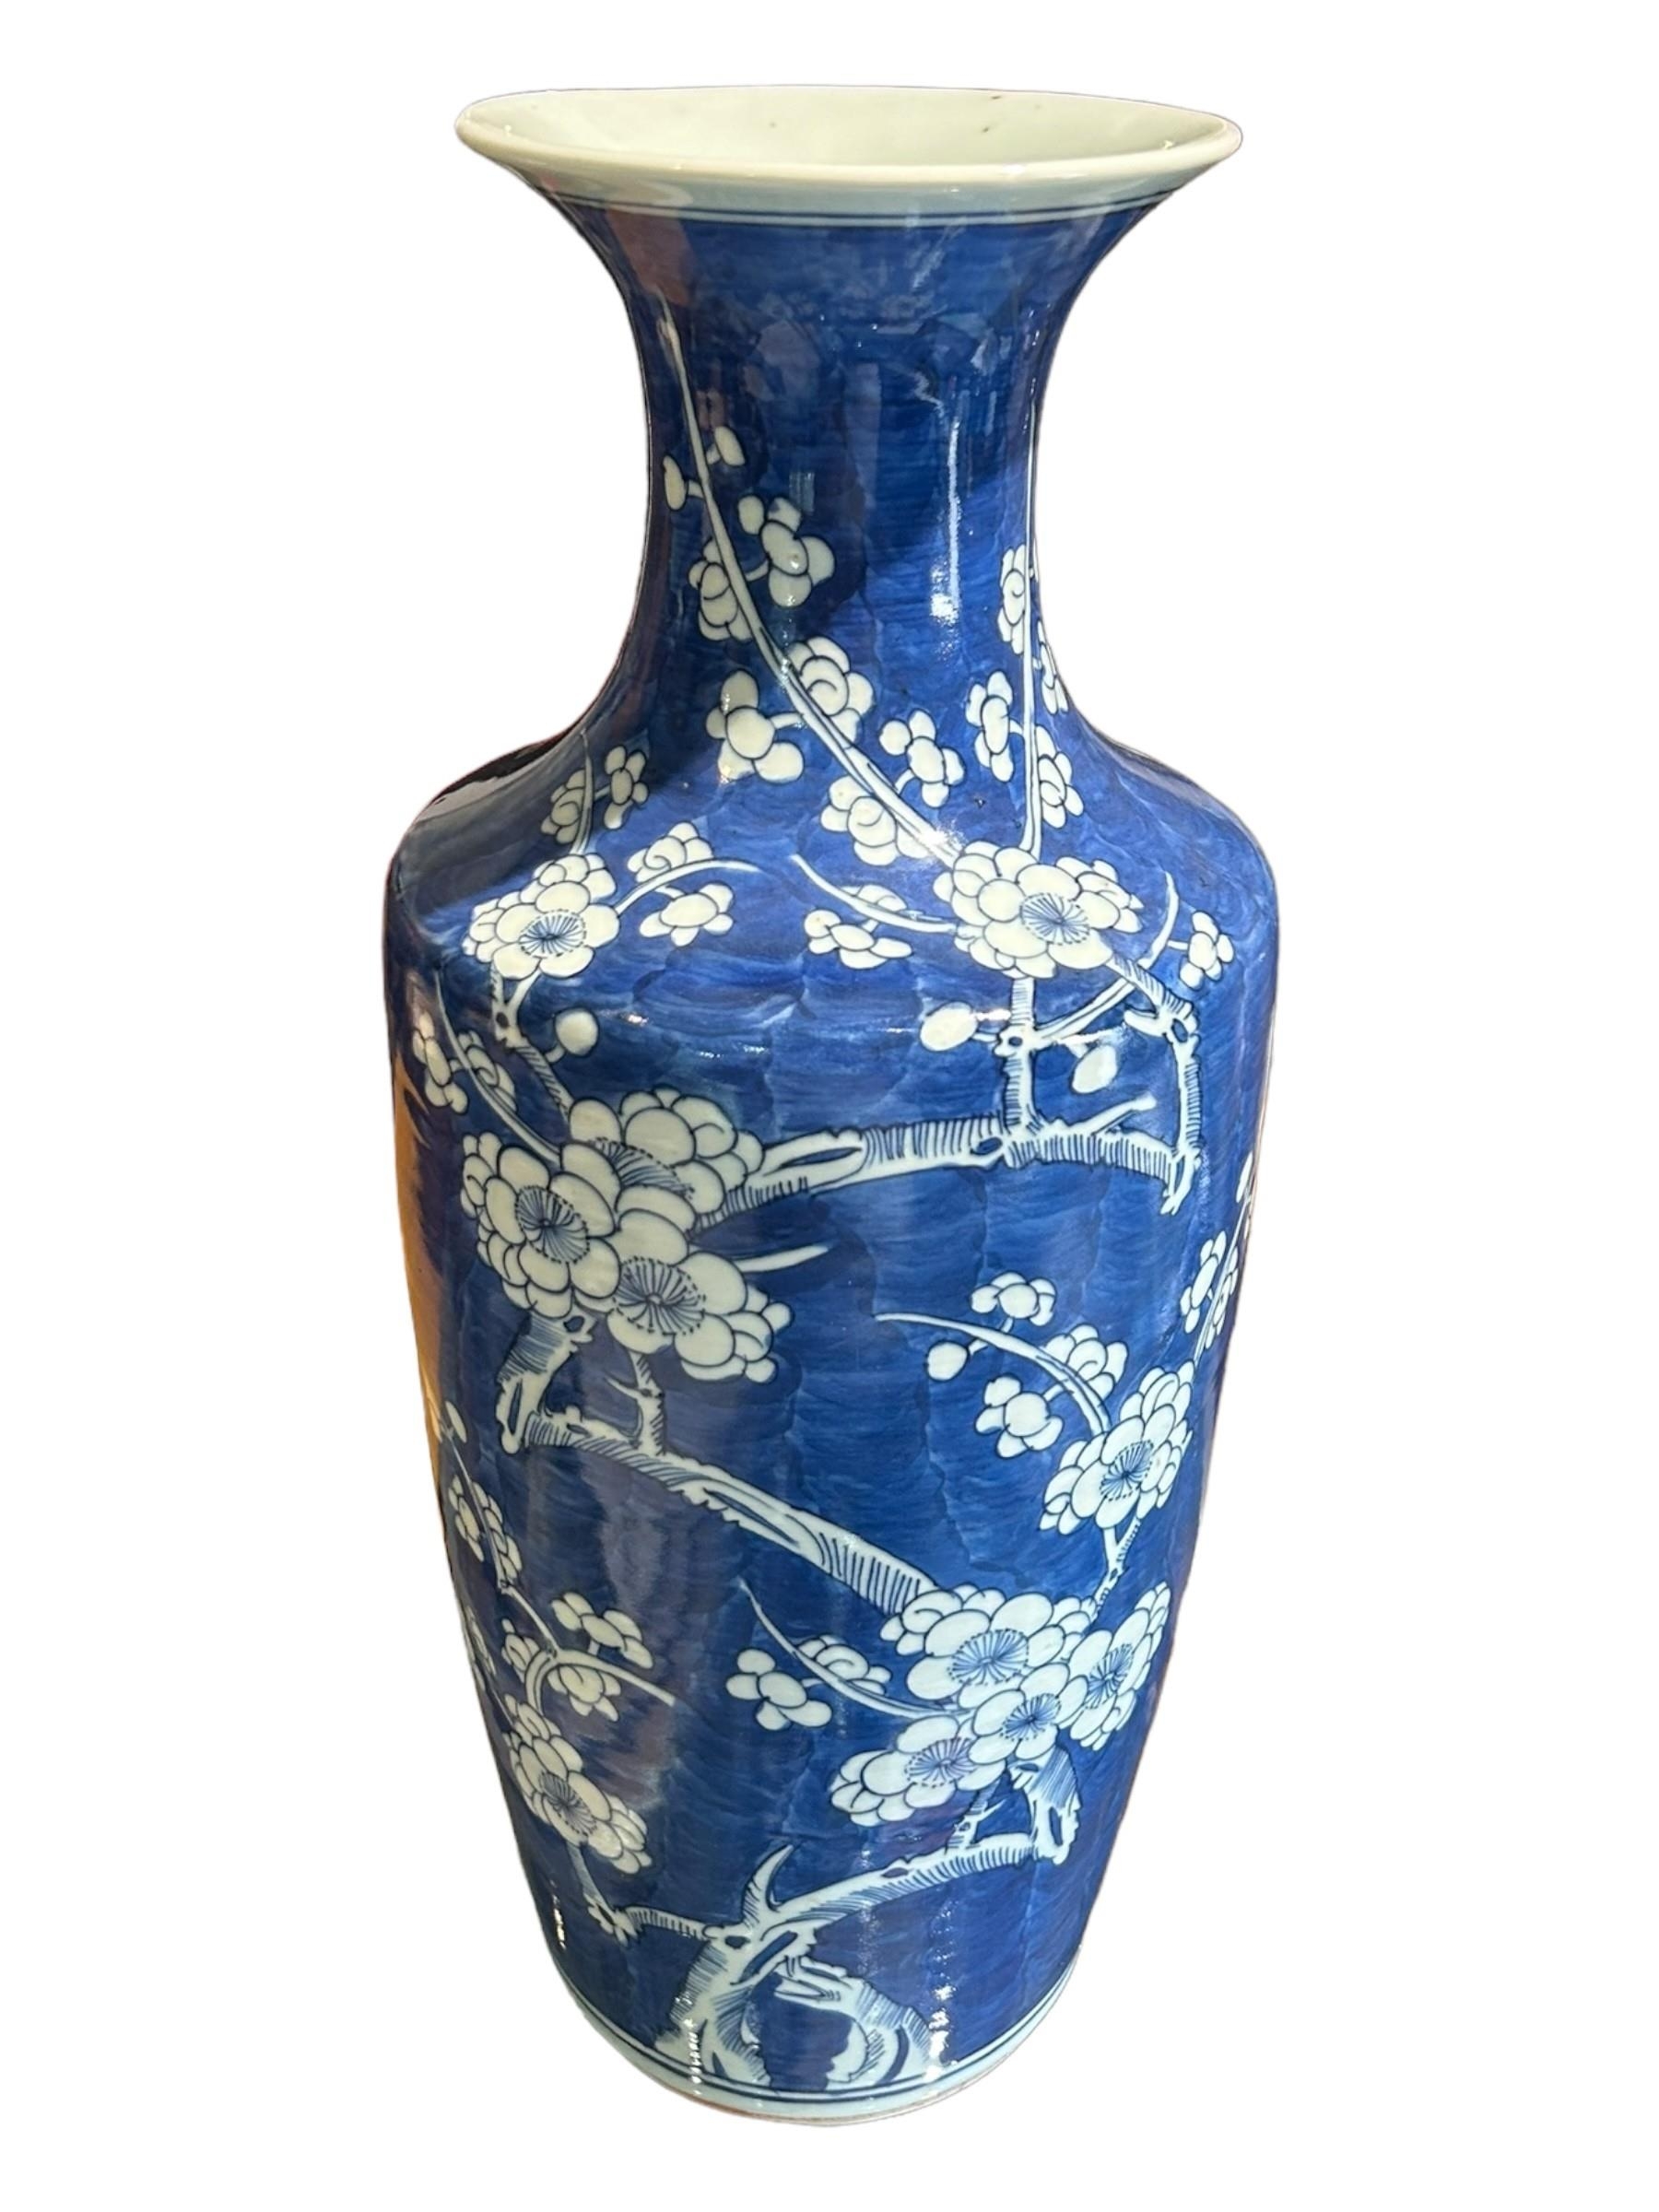 A LARGE CHINESE BLUE AND WHITE PRUNUS BLOSSOM BALUSTER VASE. (h 44cm x d 18.5cm)